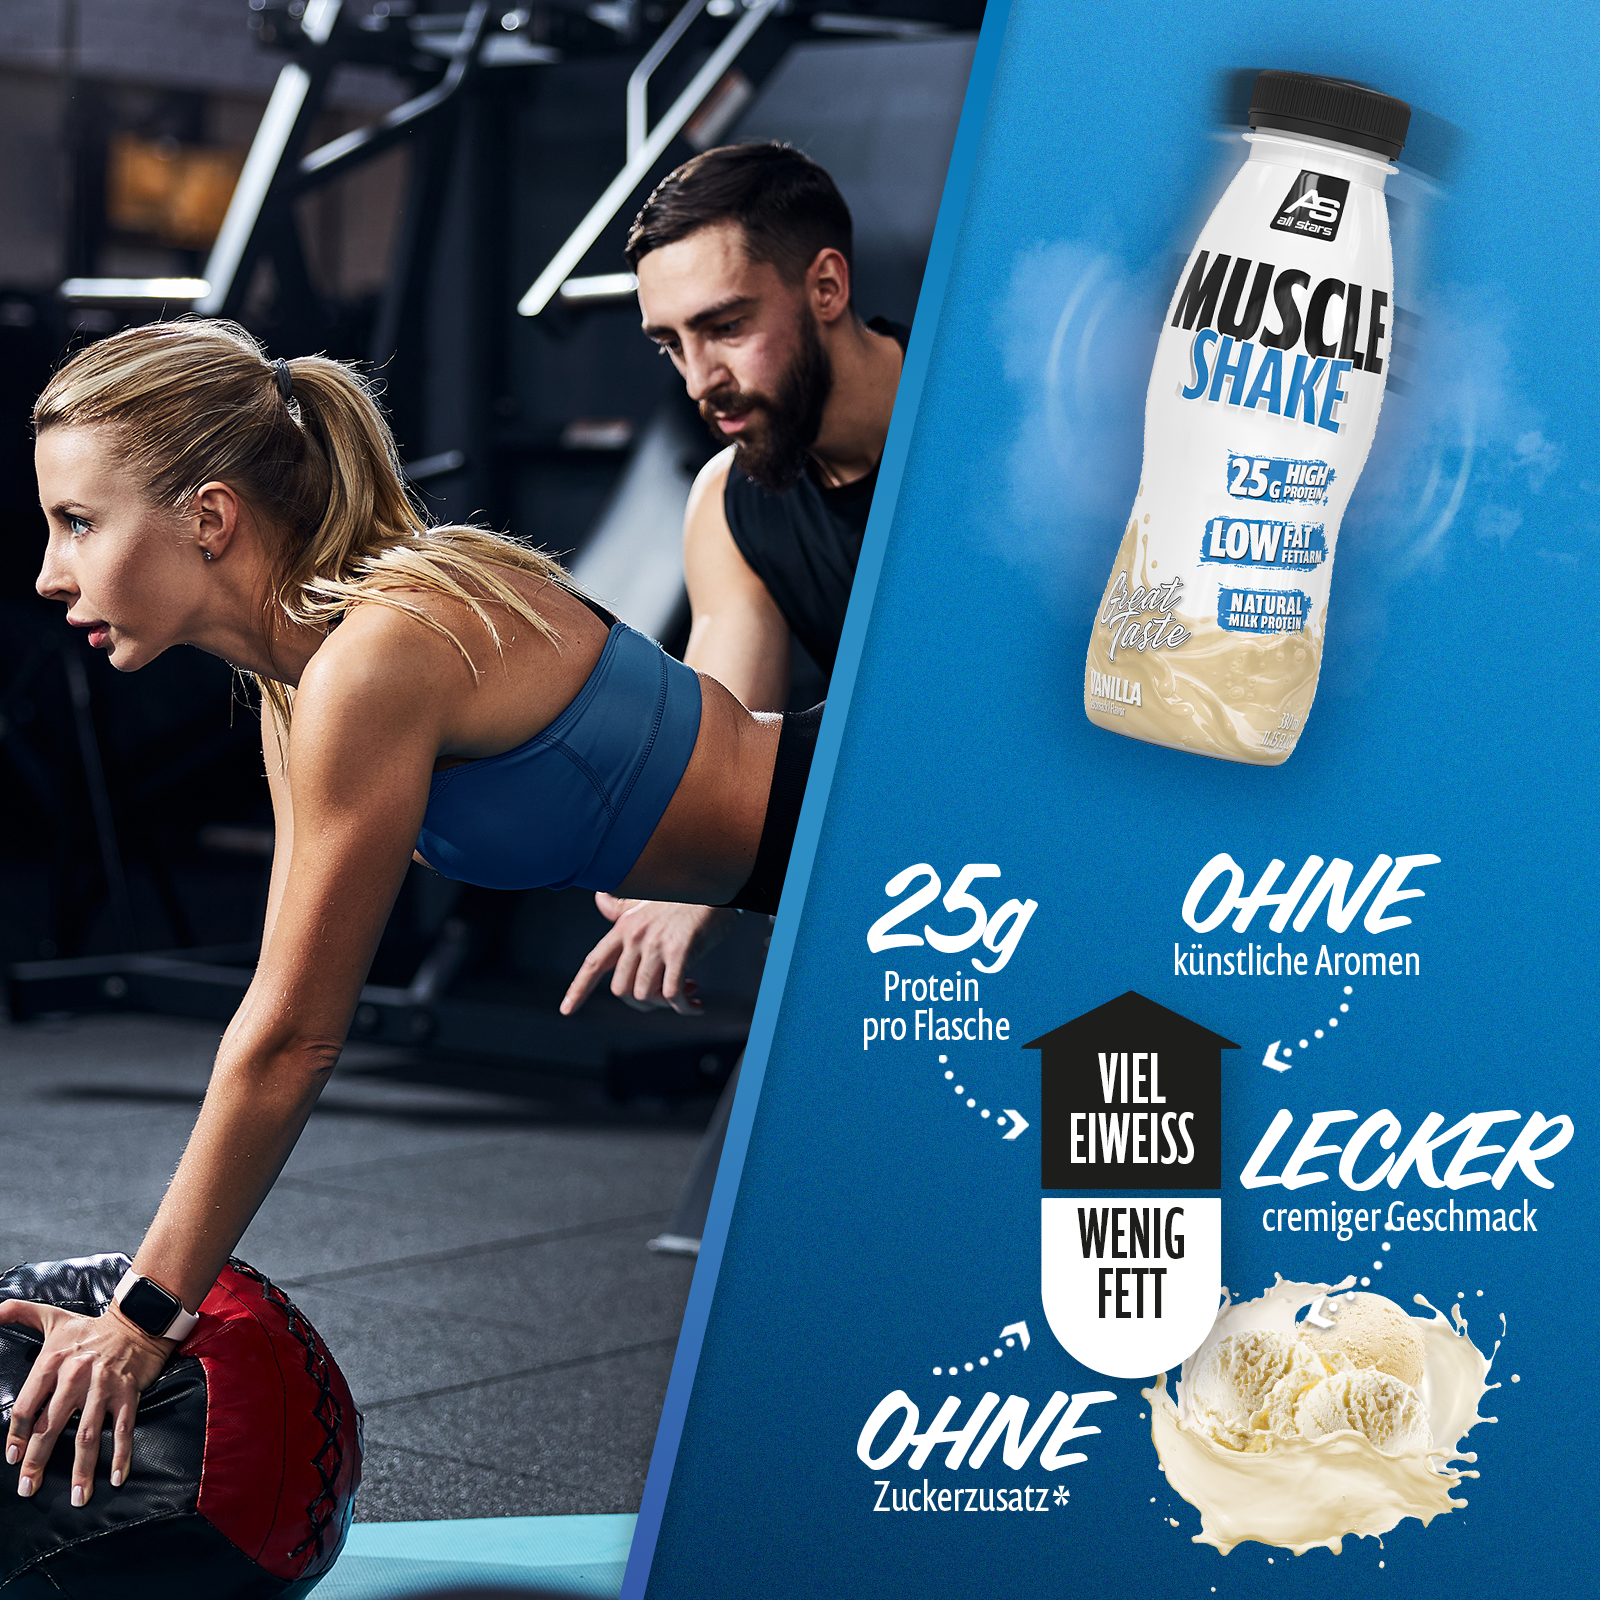 All stars Muscle shake drink Protein